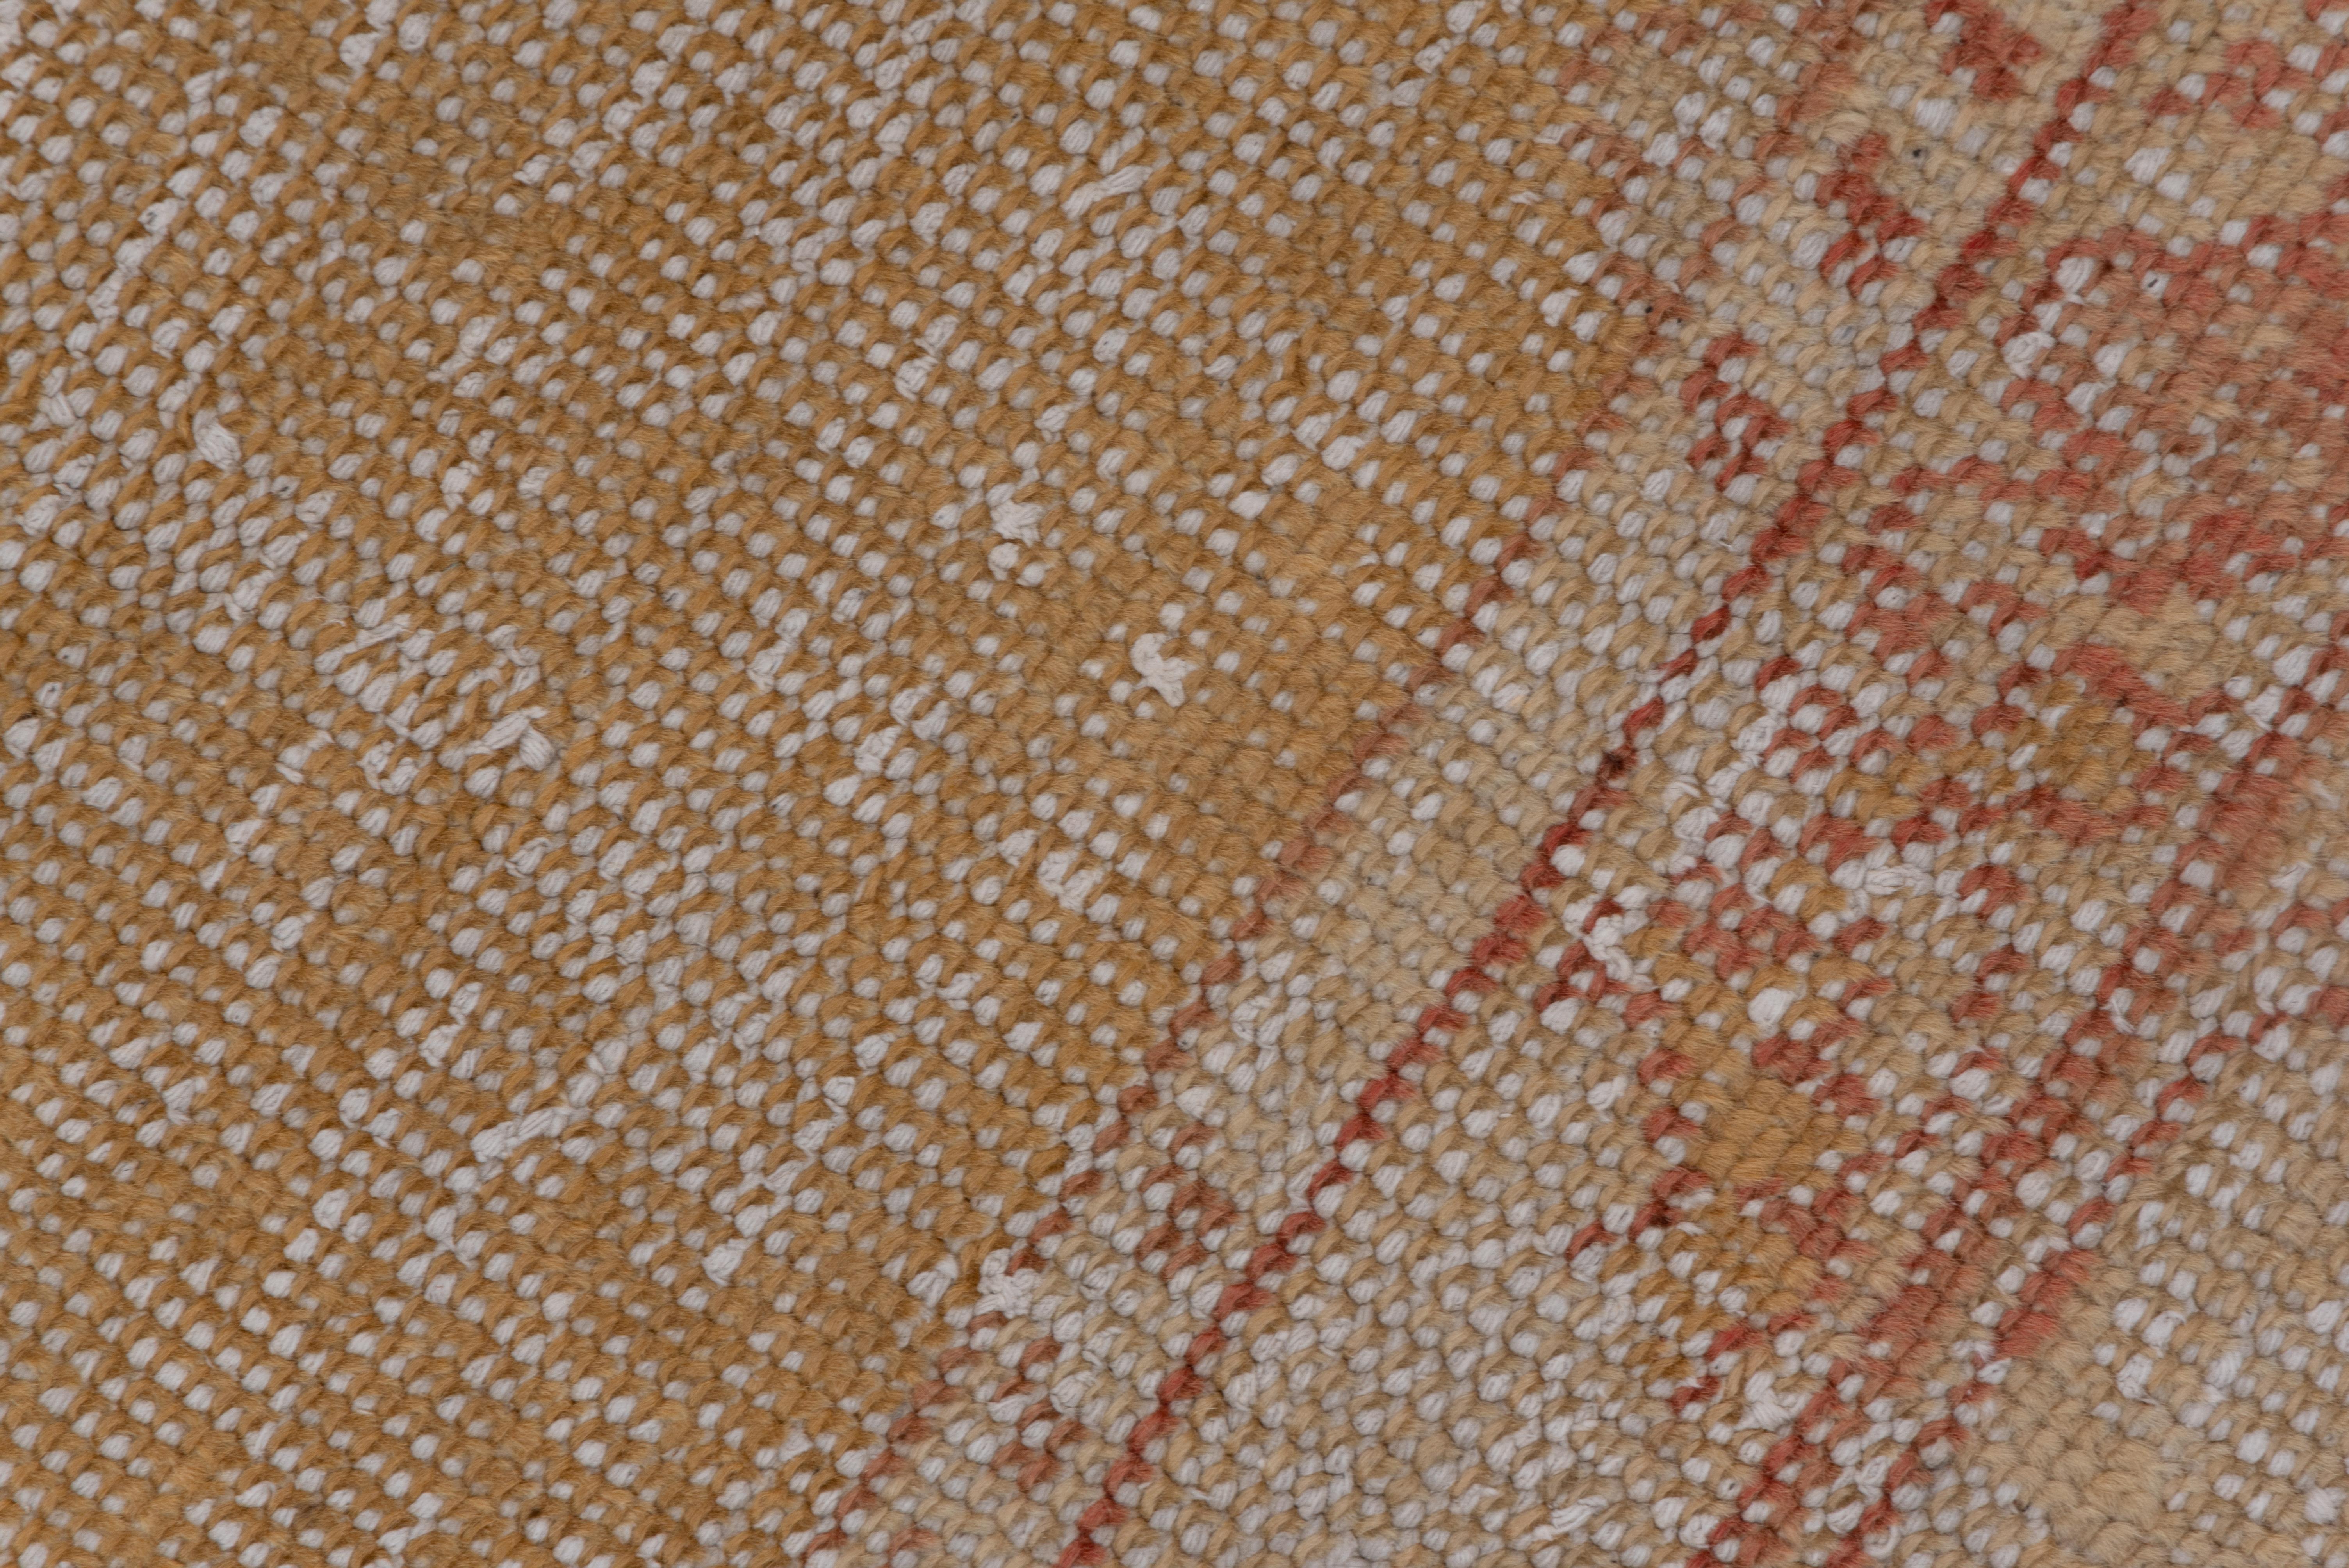 Somewhat distressed, this open, yellow field western Anatolian town carpet presents rust corners with light palmettes and thick stems. The main border alternates open cartouches with buff octofoils. Minimal design, soft colors. A big shabby chic rug.